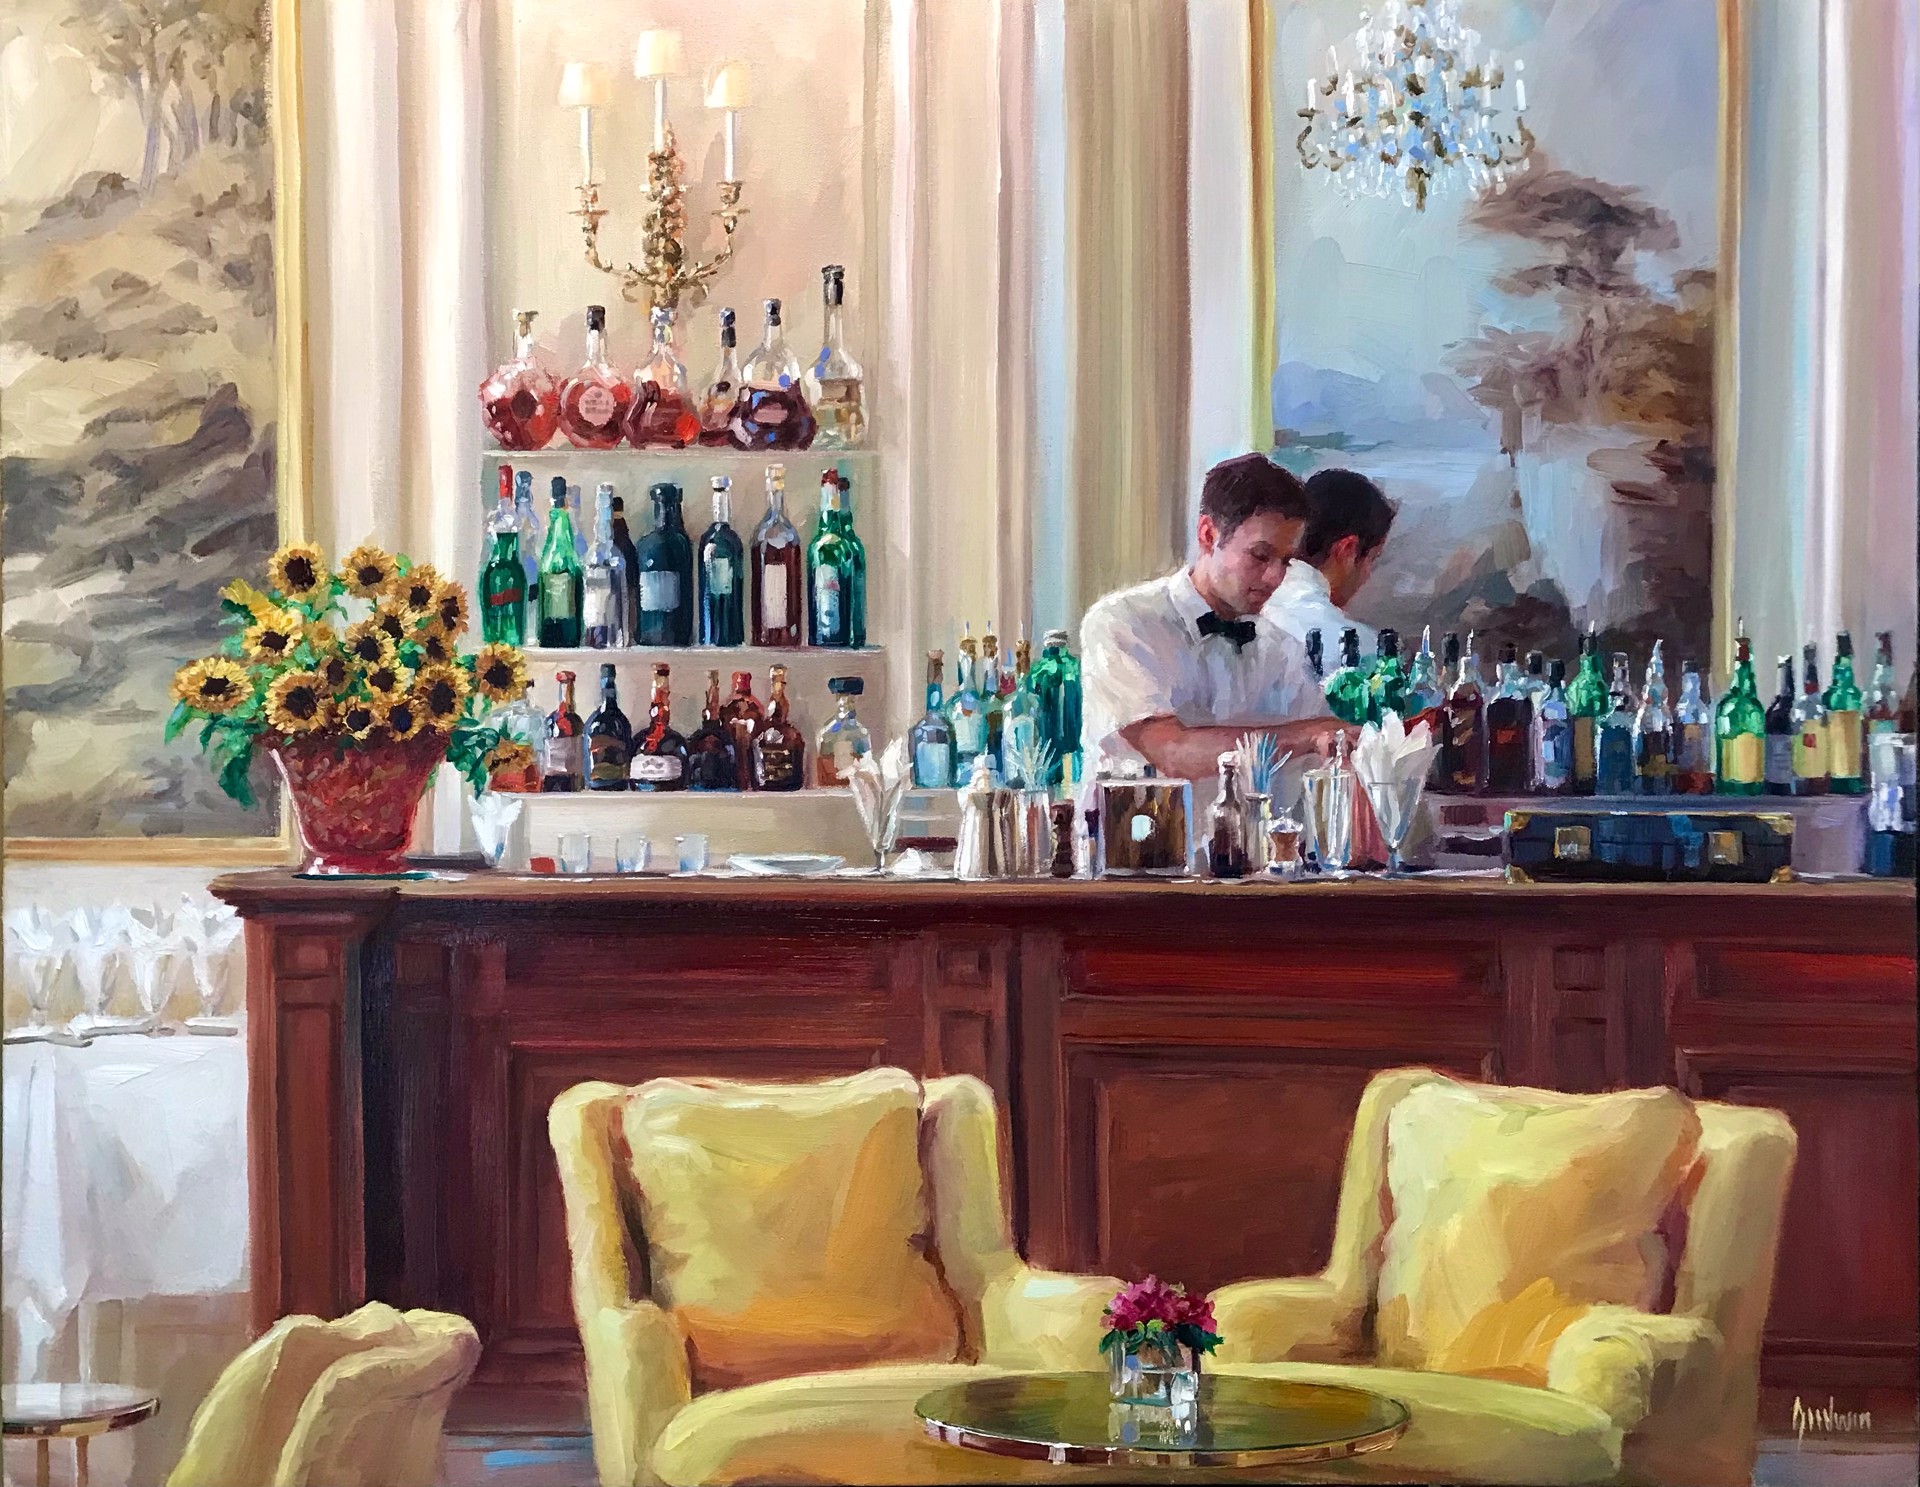 Making Drinks at Hotel du Cap-Eden-Roc, South of France by Lindsay Goodwin